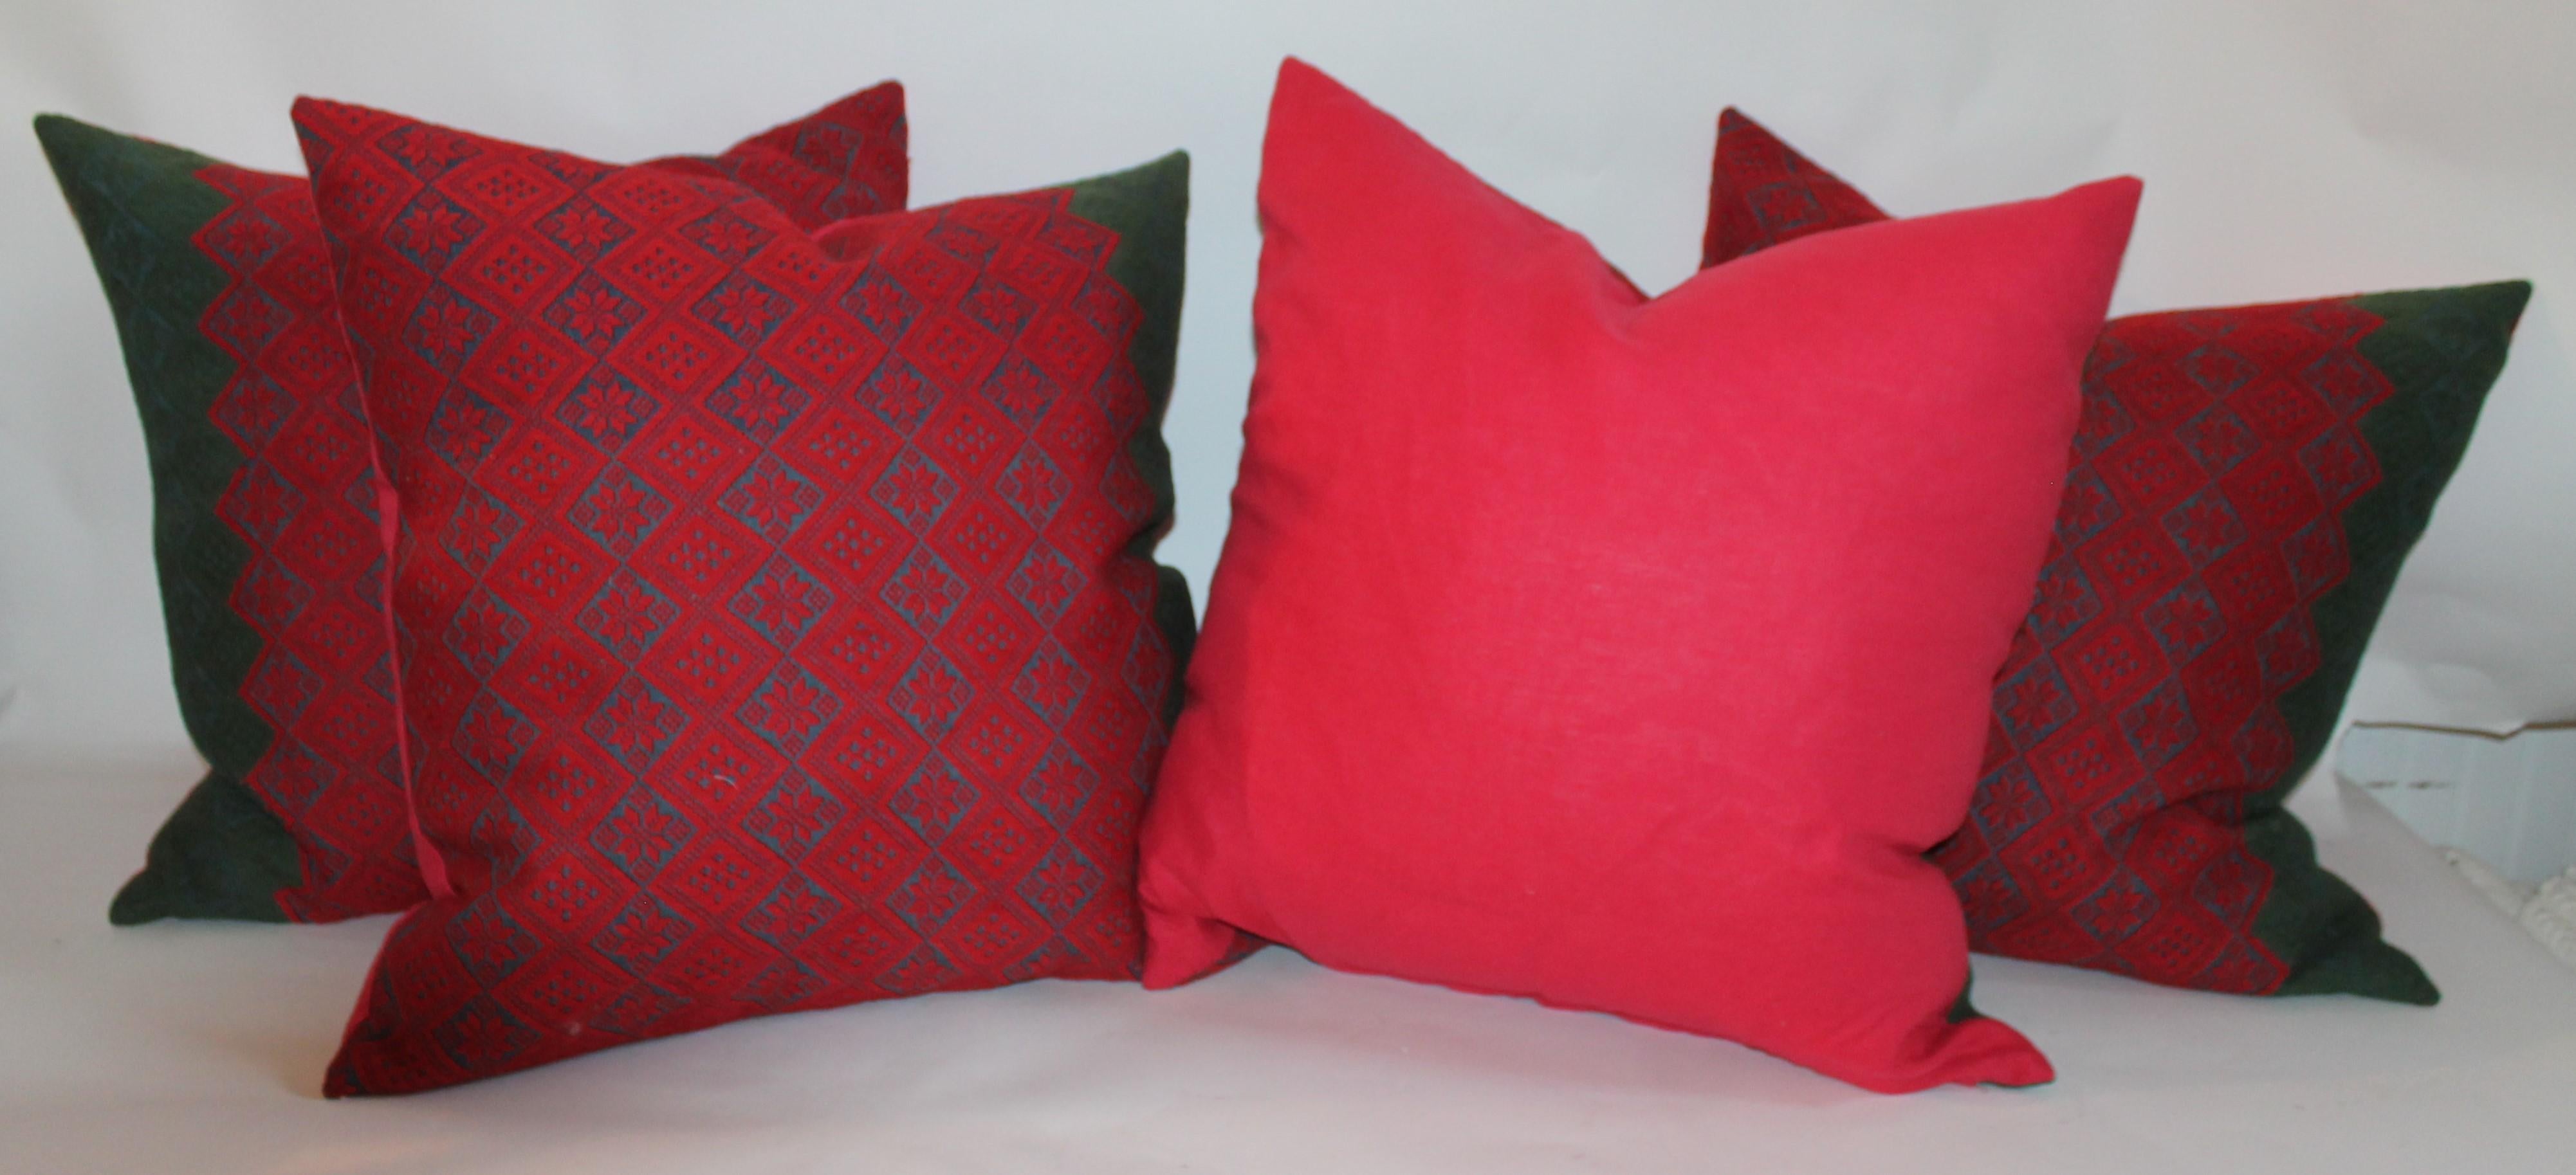 Cotton 19th Century Jacquard Woven Coverlet Pillows, Collection of Four Pillows For Sale